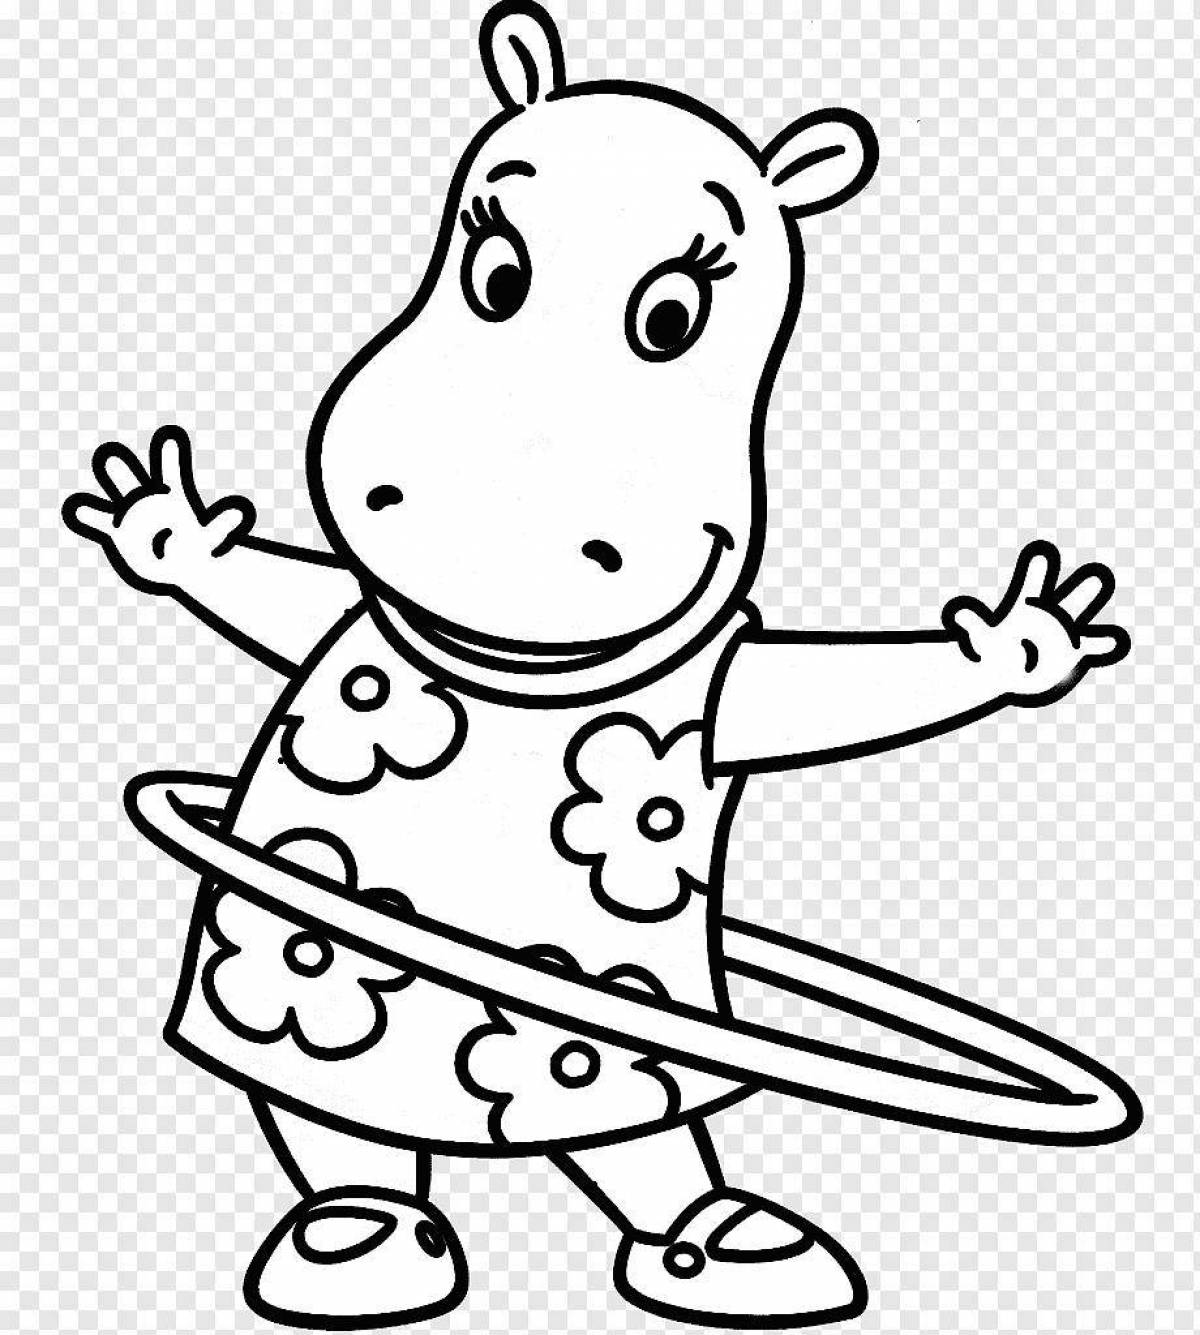 Coloring page of the outgoing hippopotamus